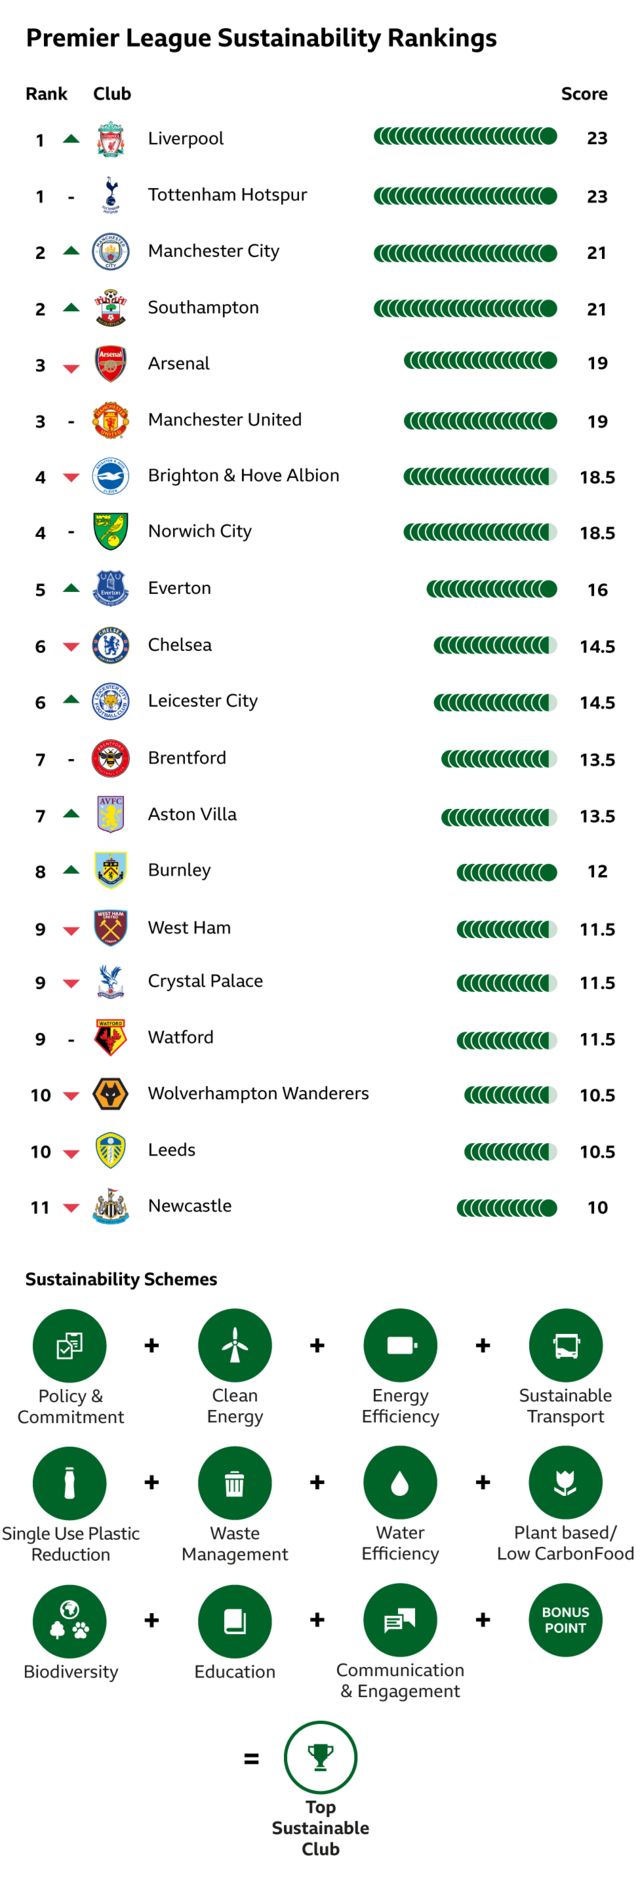 A table showing the Premier League sustainability rankings: Joint 1st - Liverpool/Tottenham; joint 2nd - Man City/Southampton; joint 3rd - Arsenal/Man Utd; joint 4th - Brighton/Norwich; 5th - Everton; joint 6th - Chelsea/Leicester; joint 7th - Brentford/Aston Villa; 8th - Burnley; joint 9th - West Ham/Crystal Palace/Watford; joint 10th - Wolves/Leeds; 11th - Newcastle